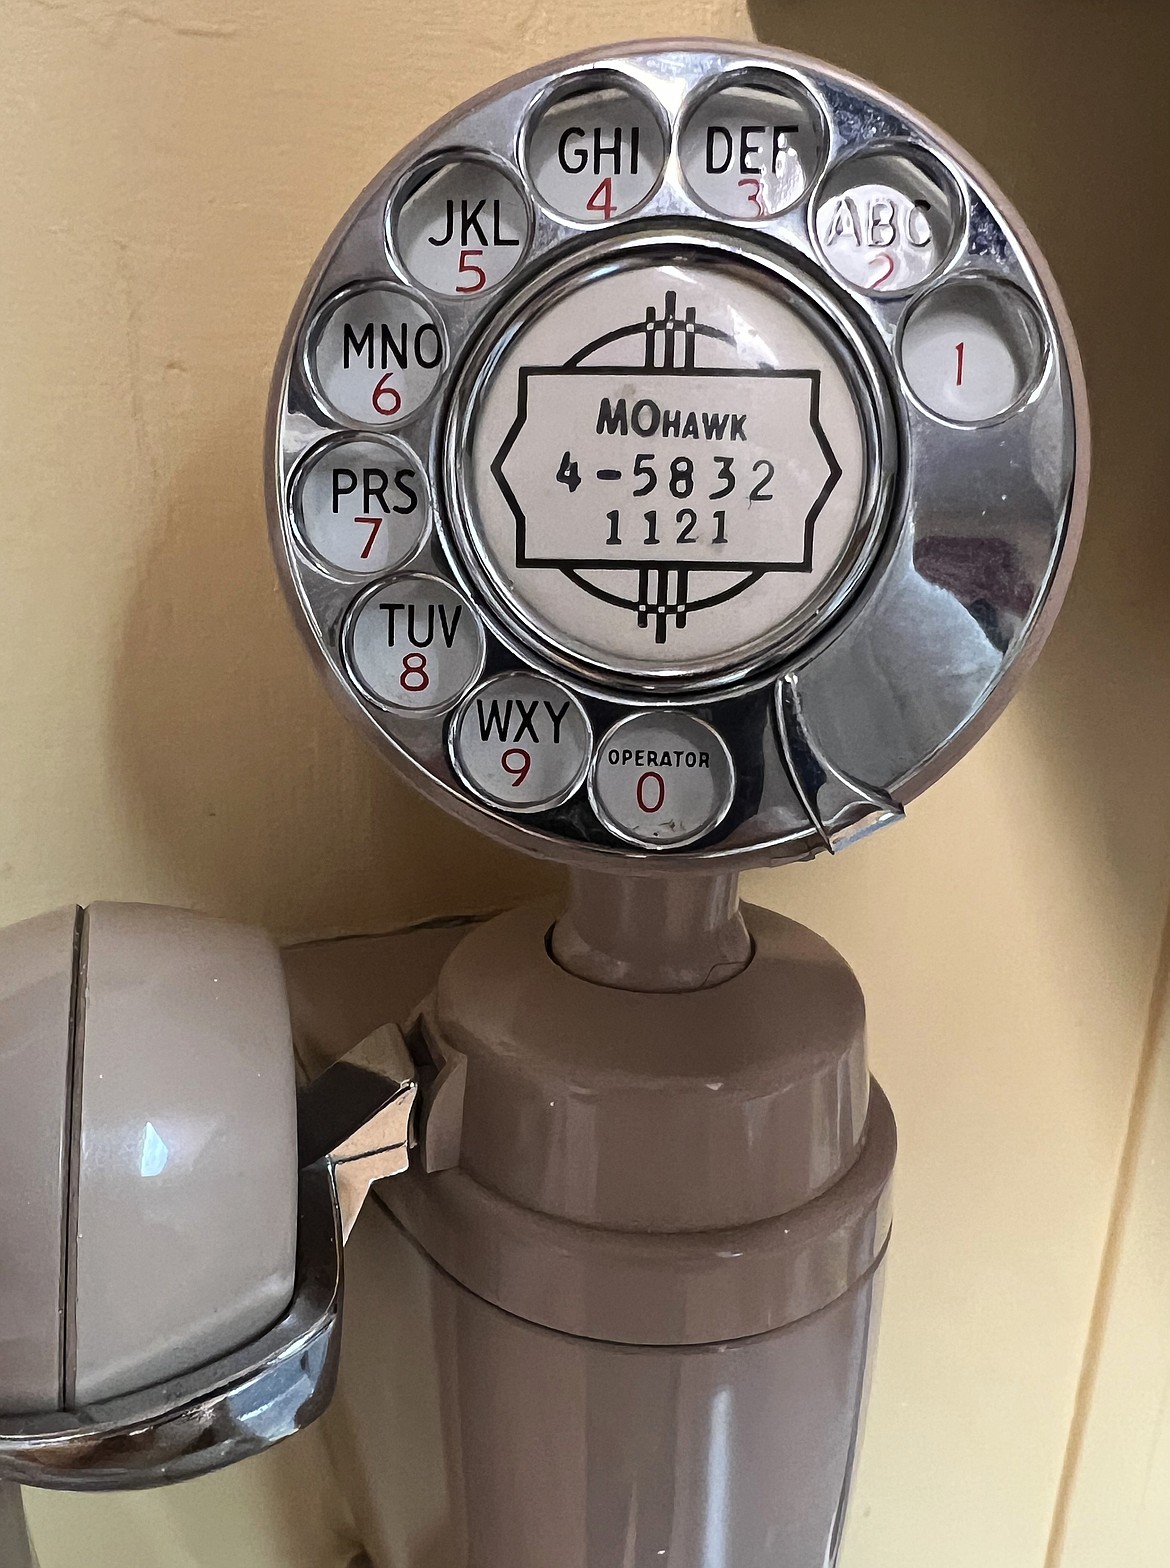 Tom Hearn’s rotary dial phone with the “Mohawk” prefix.